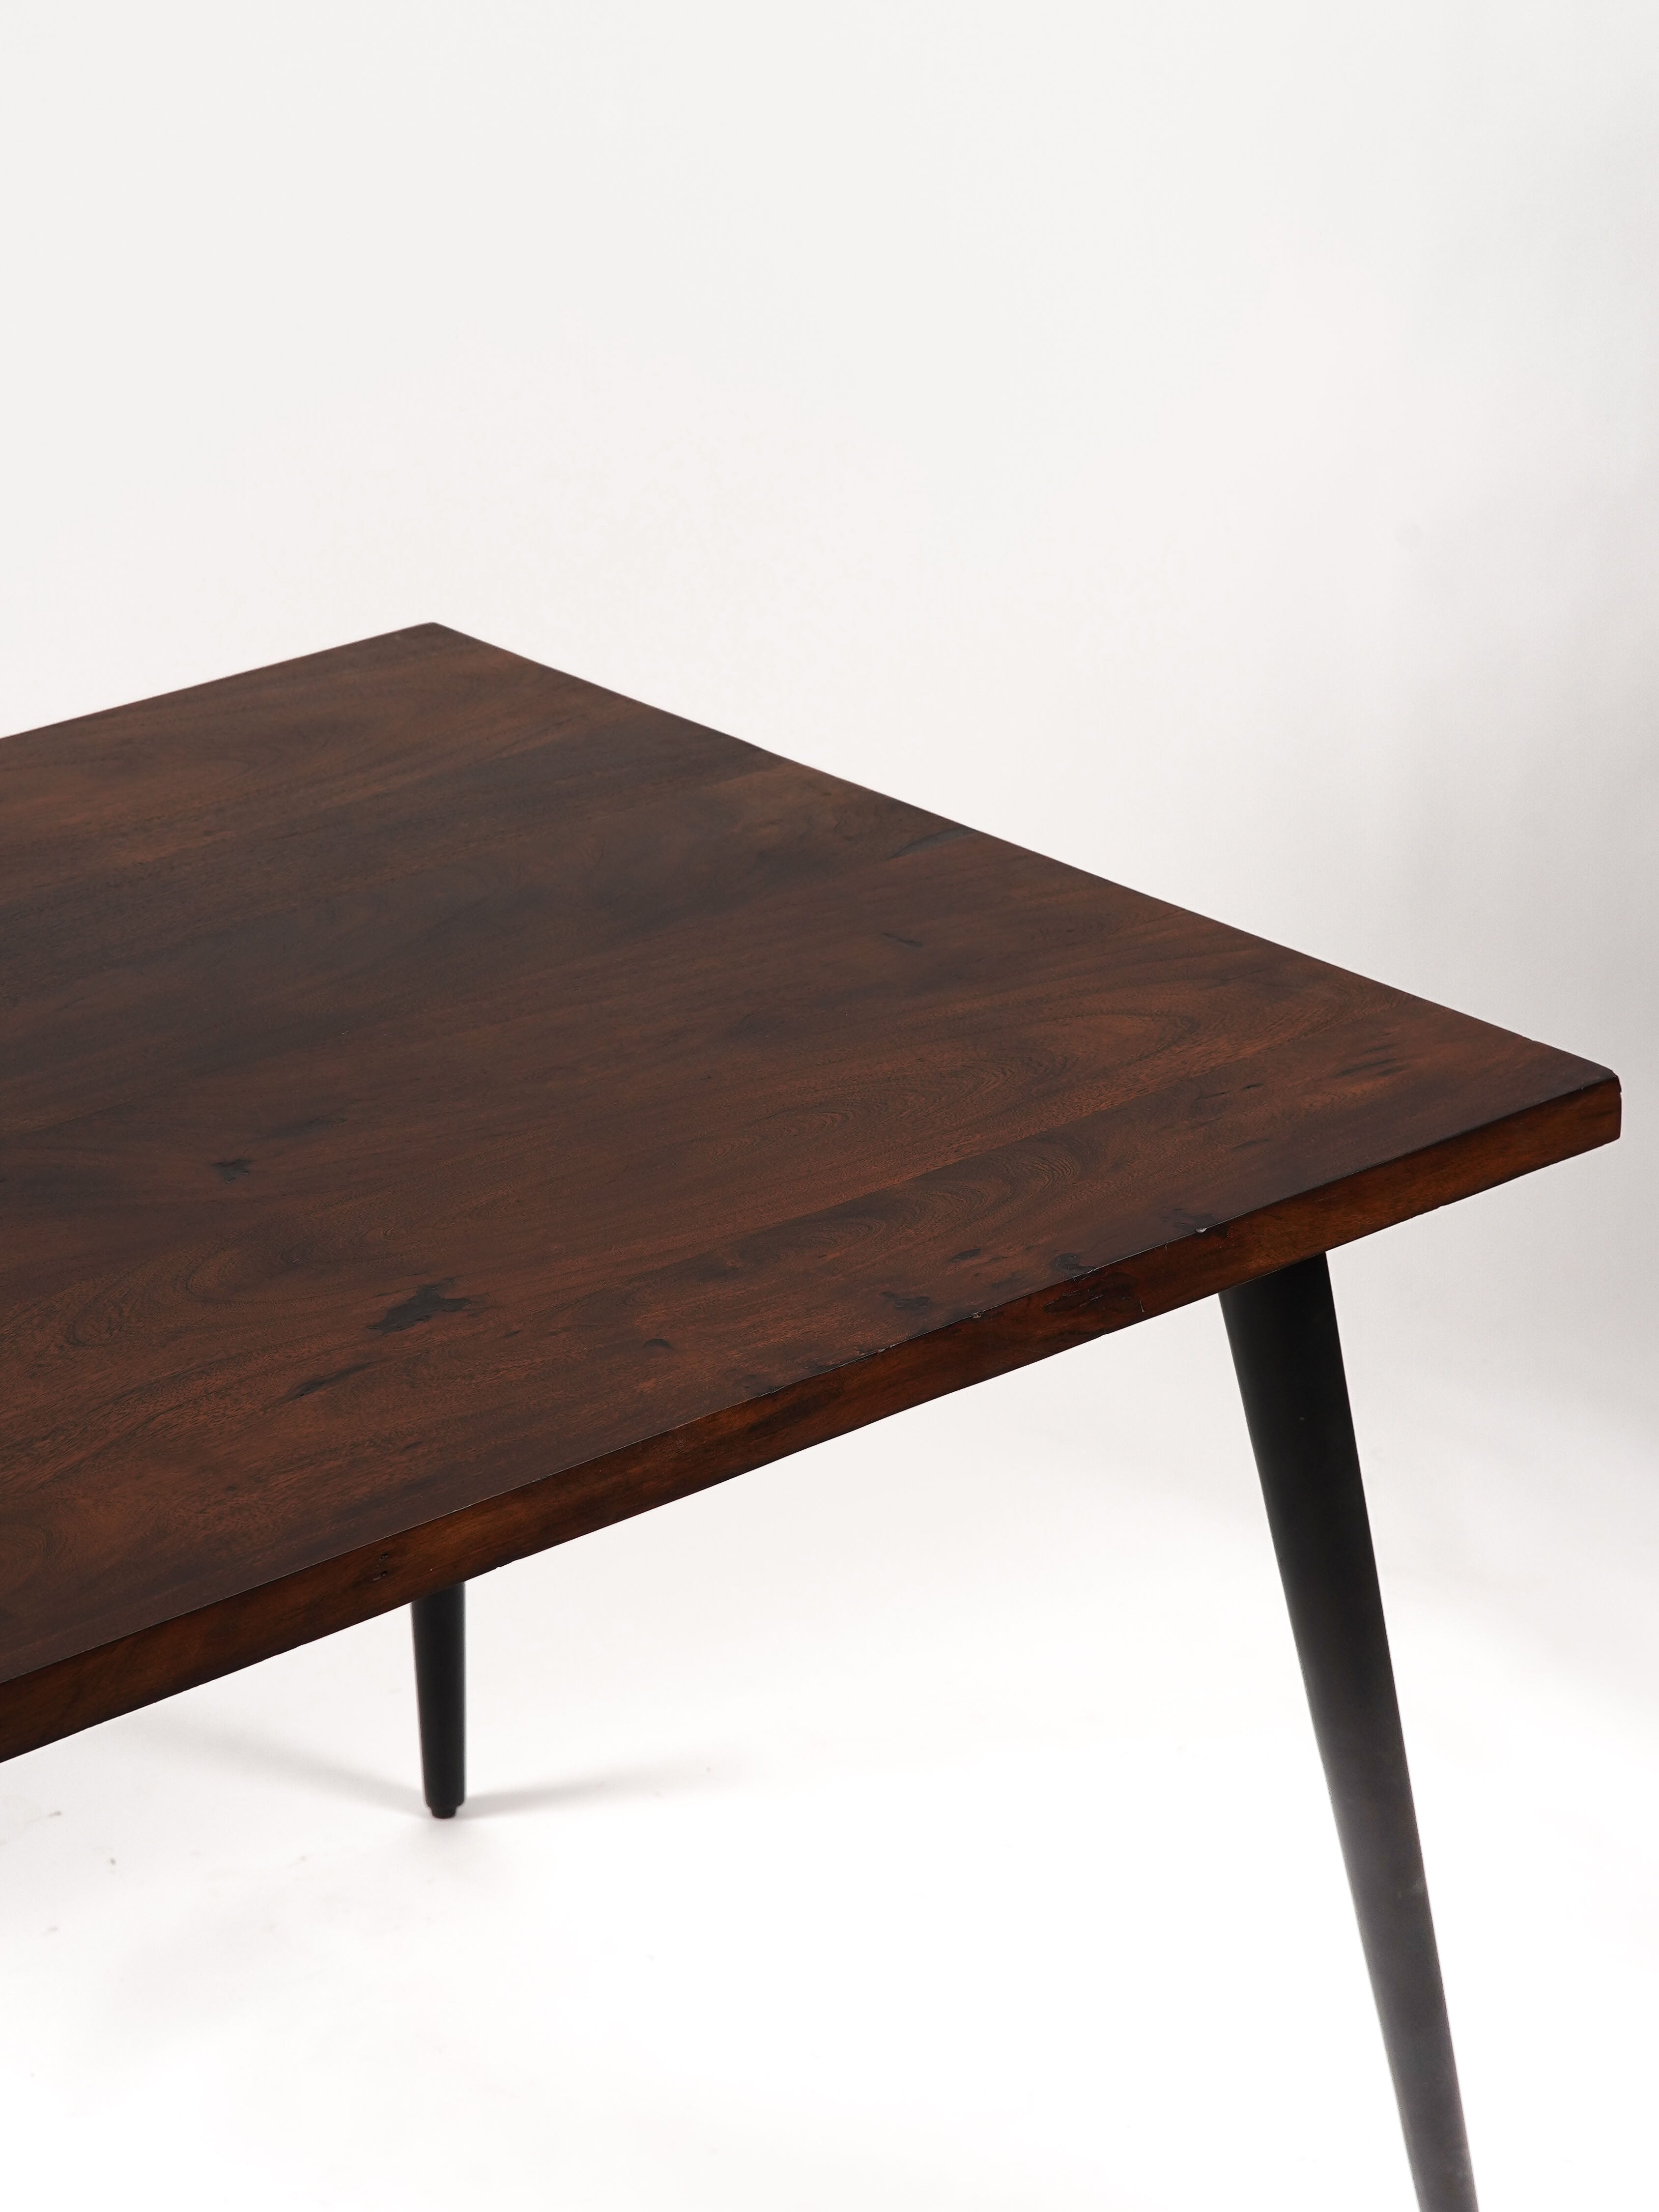 Main Solid Wood Dining Table (70") - Walnut